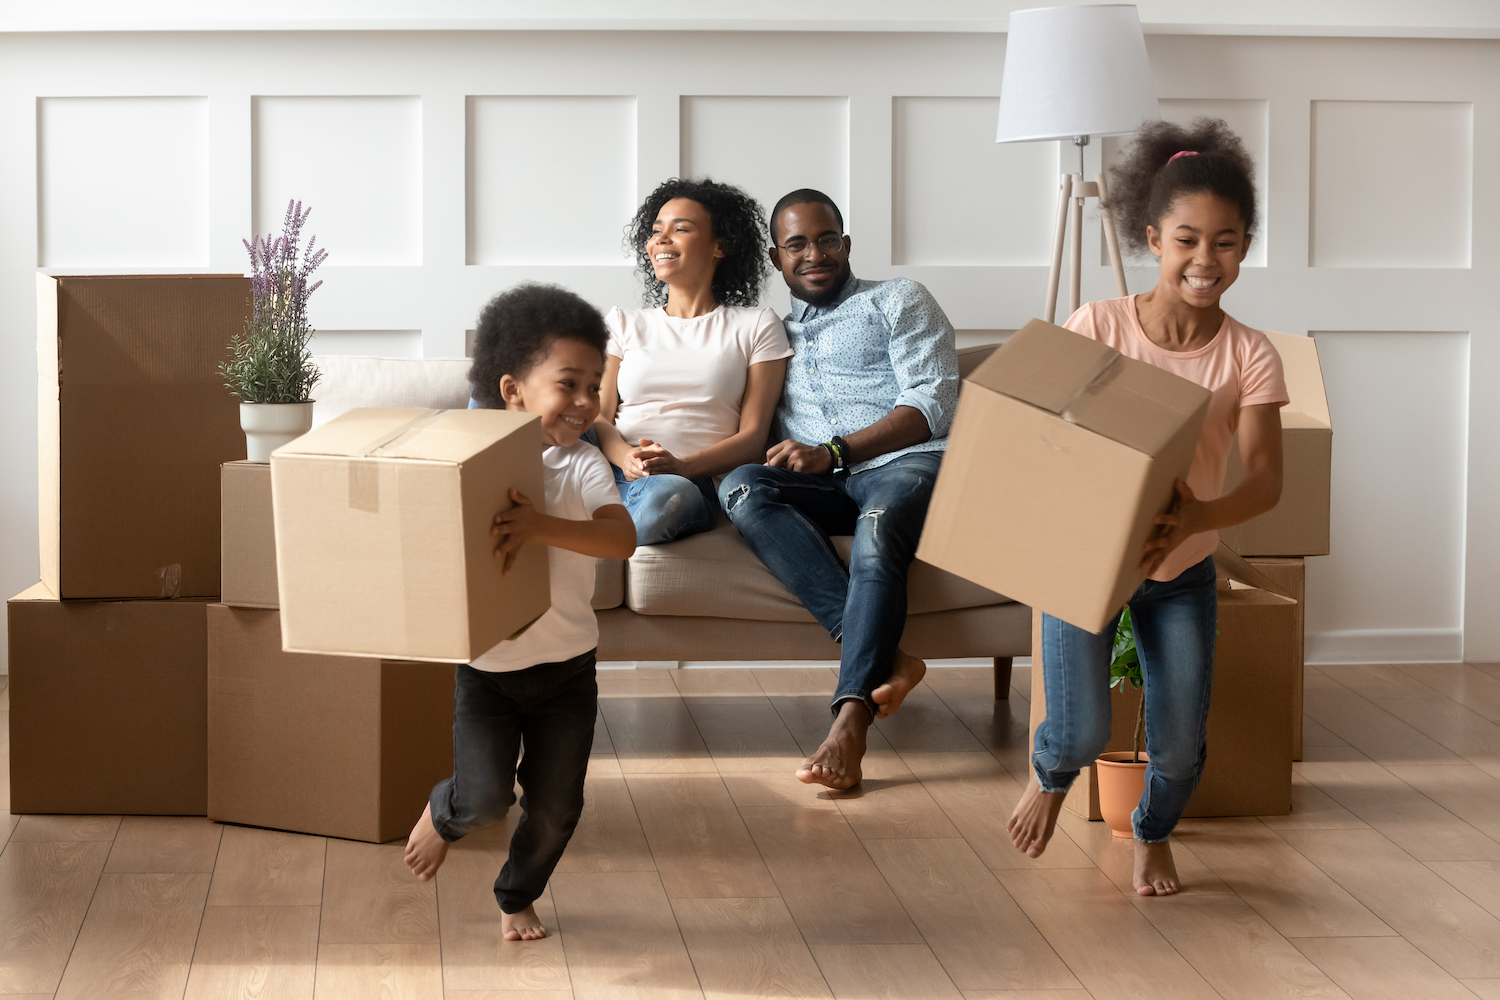 Happy cute little african kids holding boxes run play in living room while parents relax on moving day, black family renters tenants with children celebrate buy new home having fun renovate house